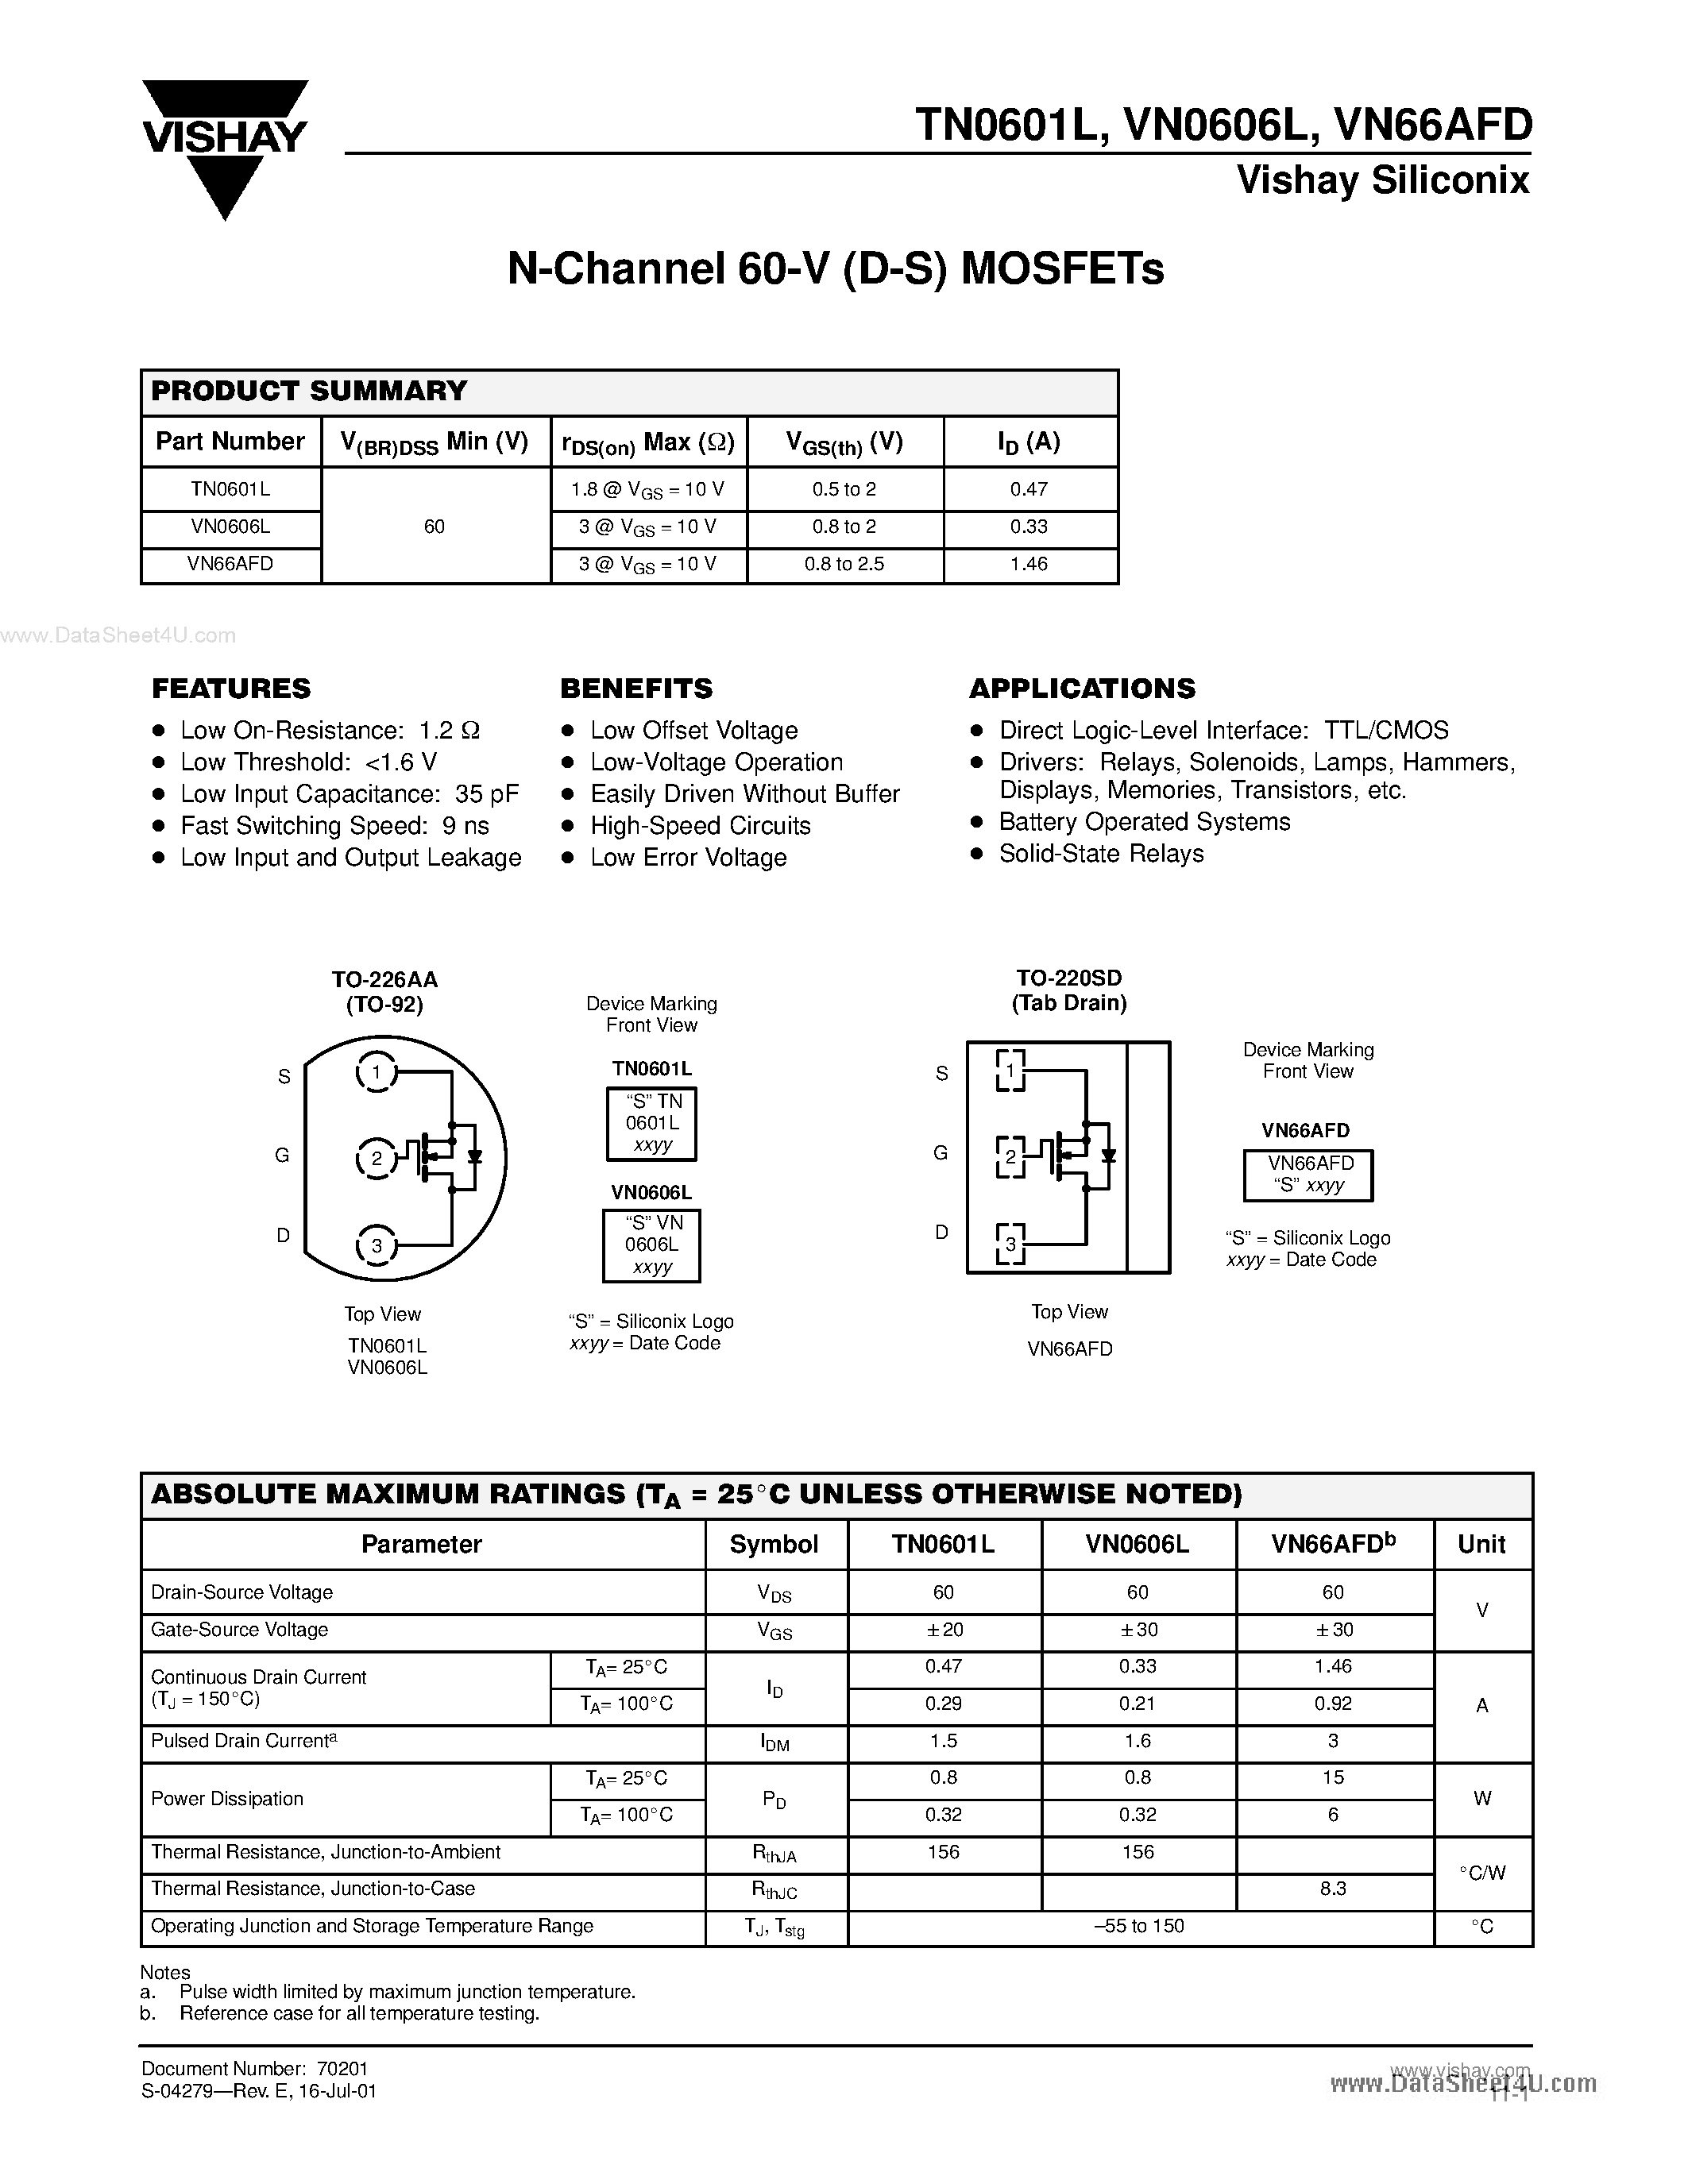 Datasheet VN0606L - N-Channel 60-V (D-S) MOSFETs page 1